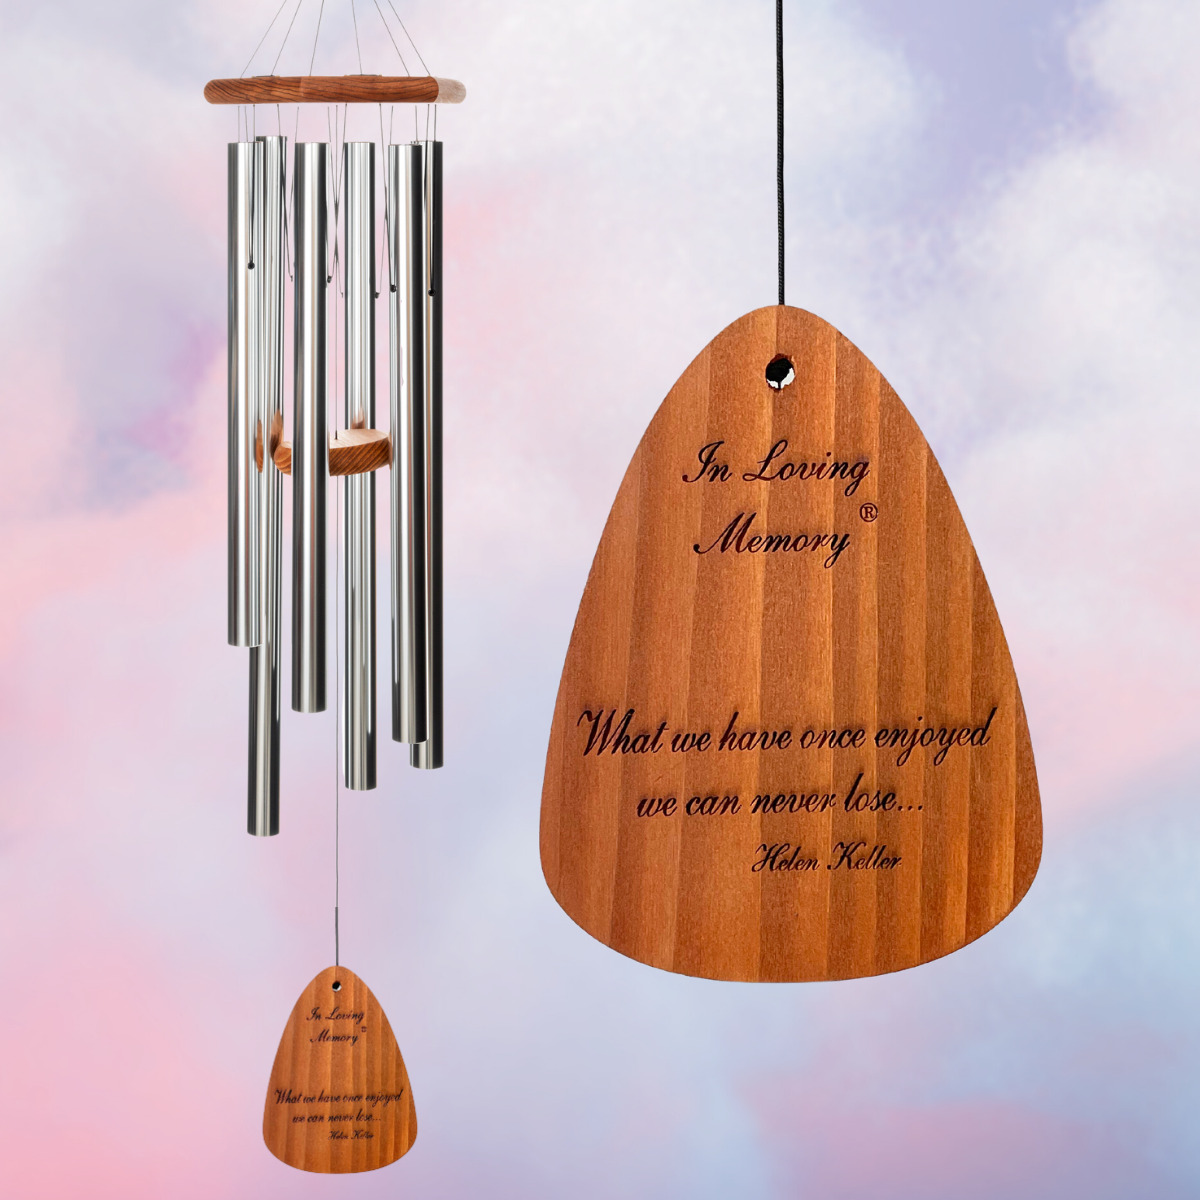 In Loving Memory 42 Inch Windchime - What we have once enjoyed - Silver